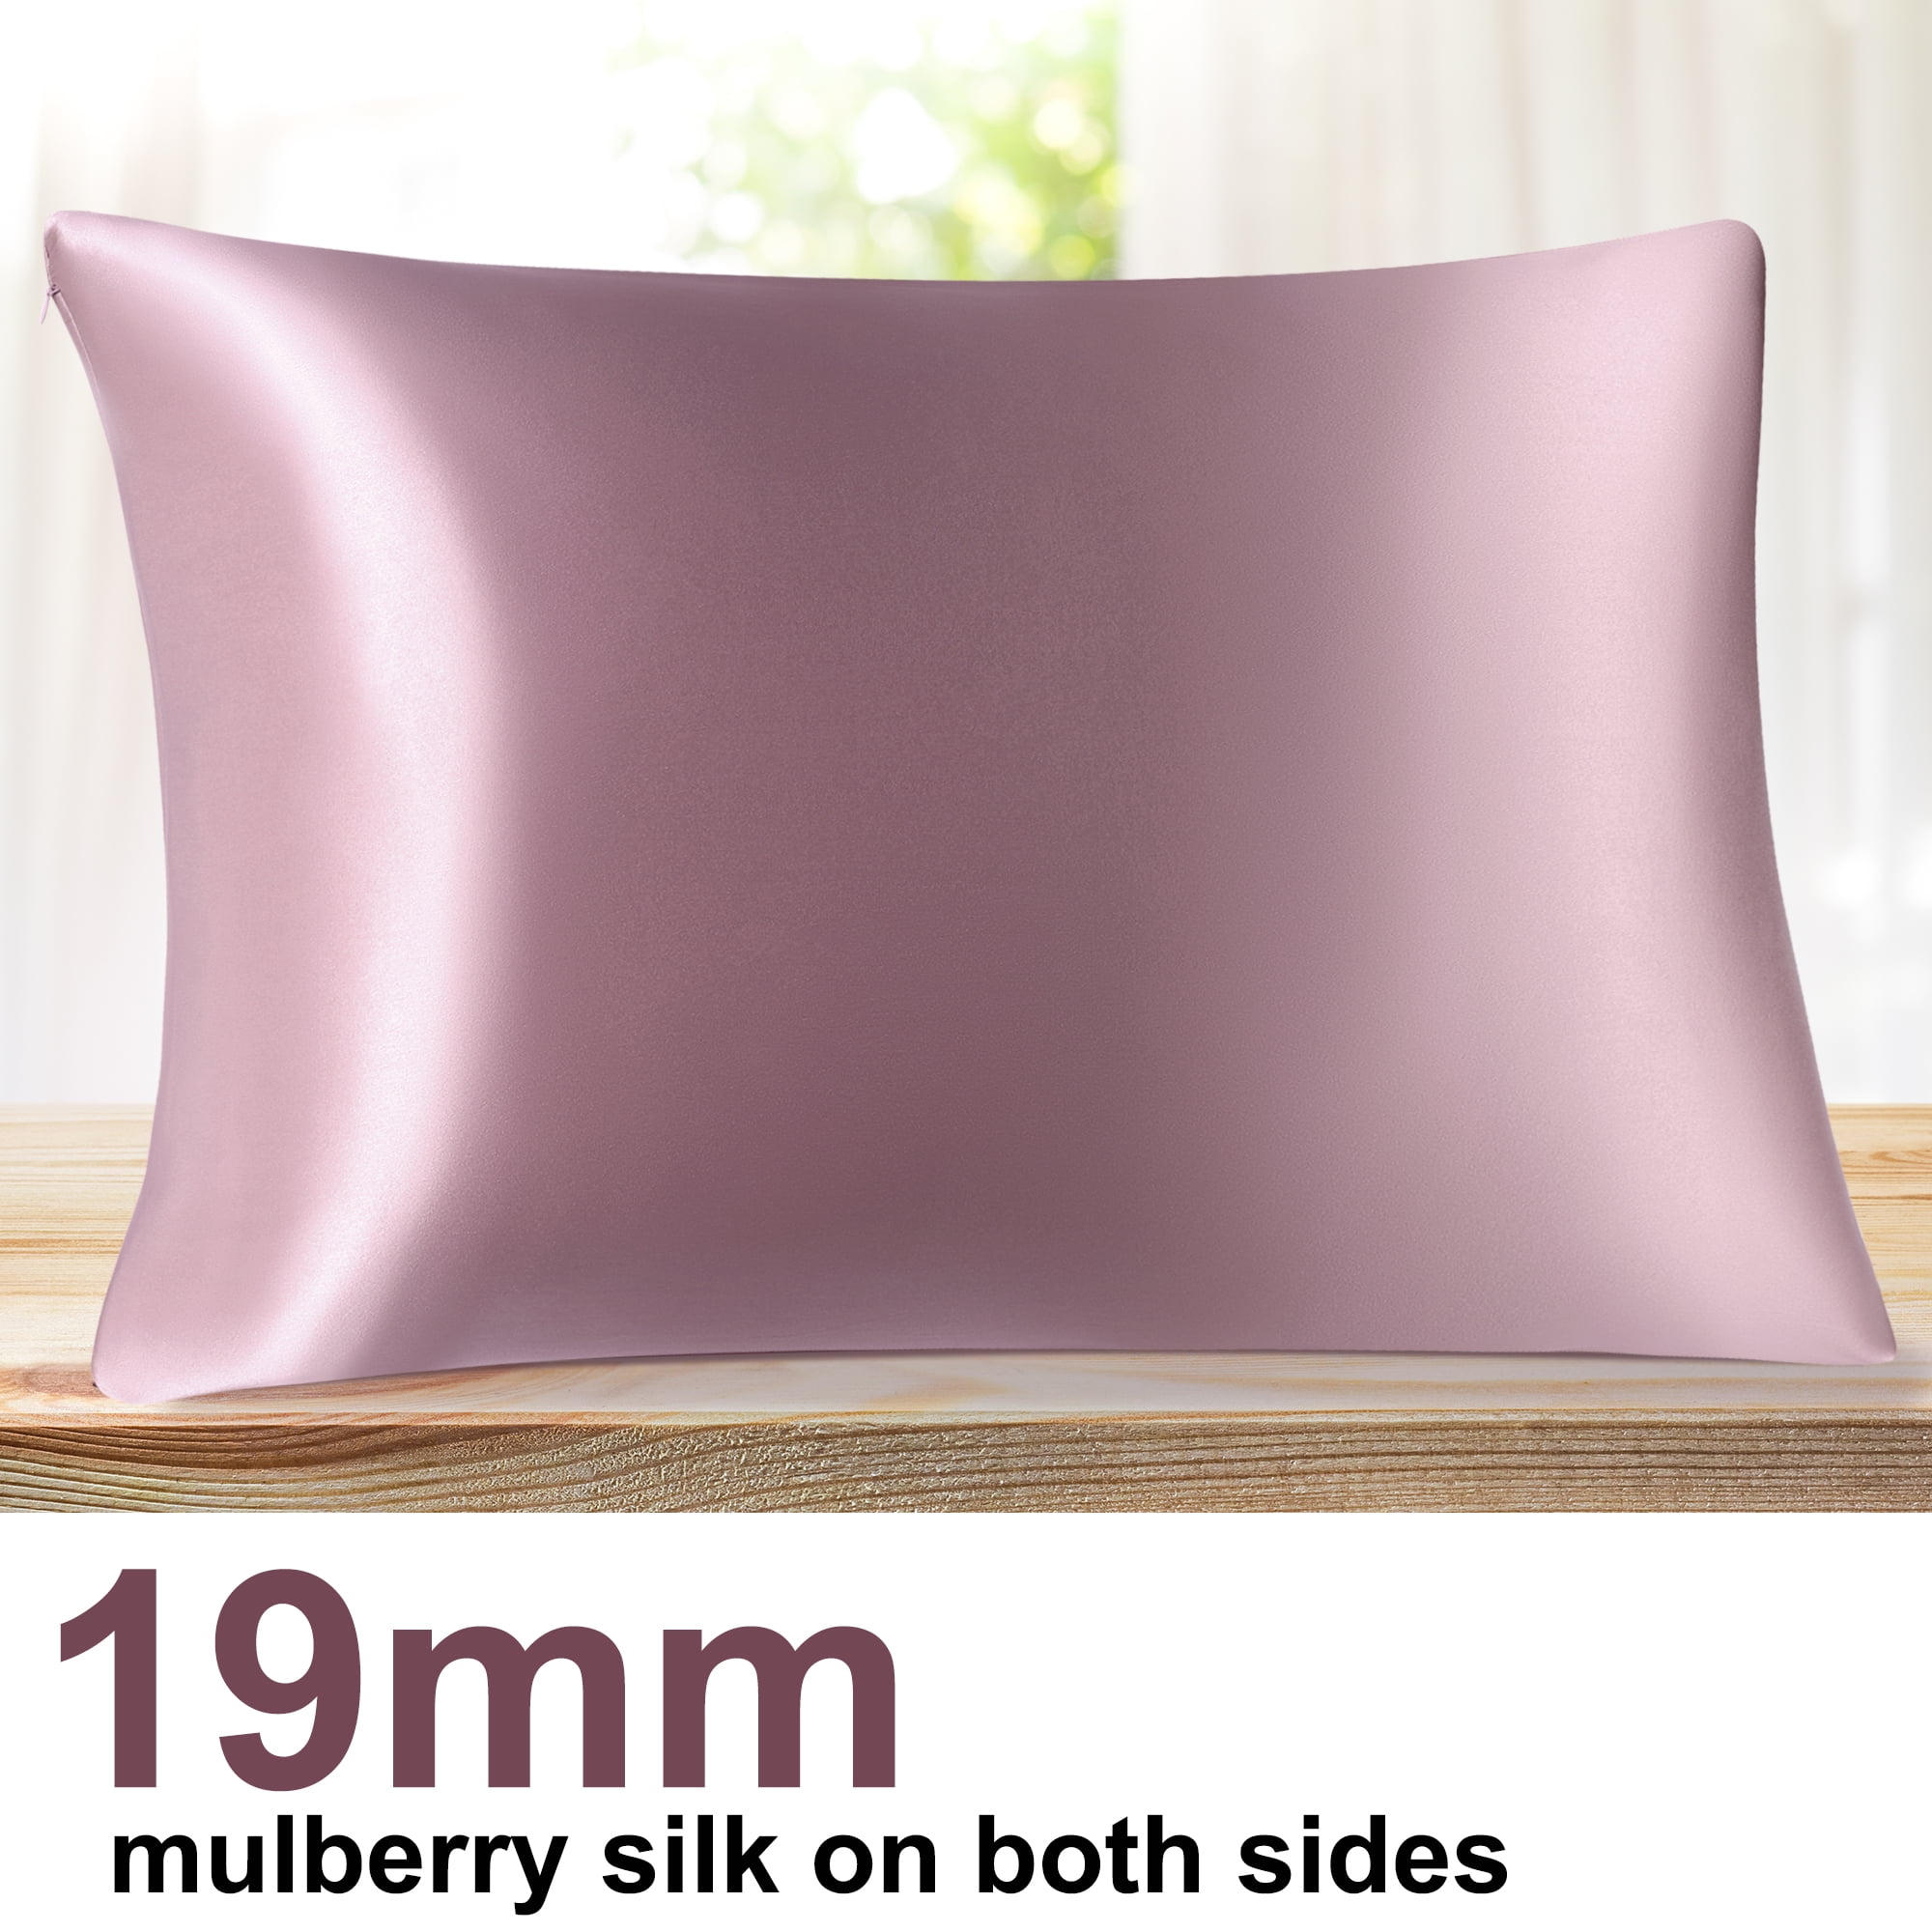 Details about   19 Momme Silk Pillowcase for Hair Skin Pillow Case with Zipper 